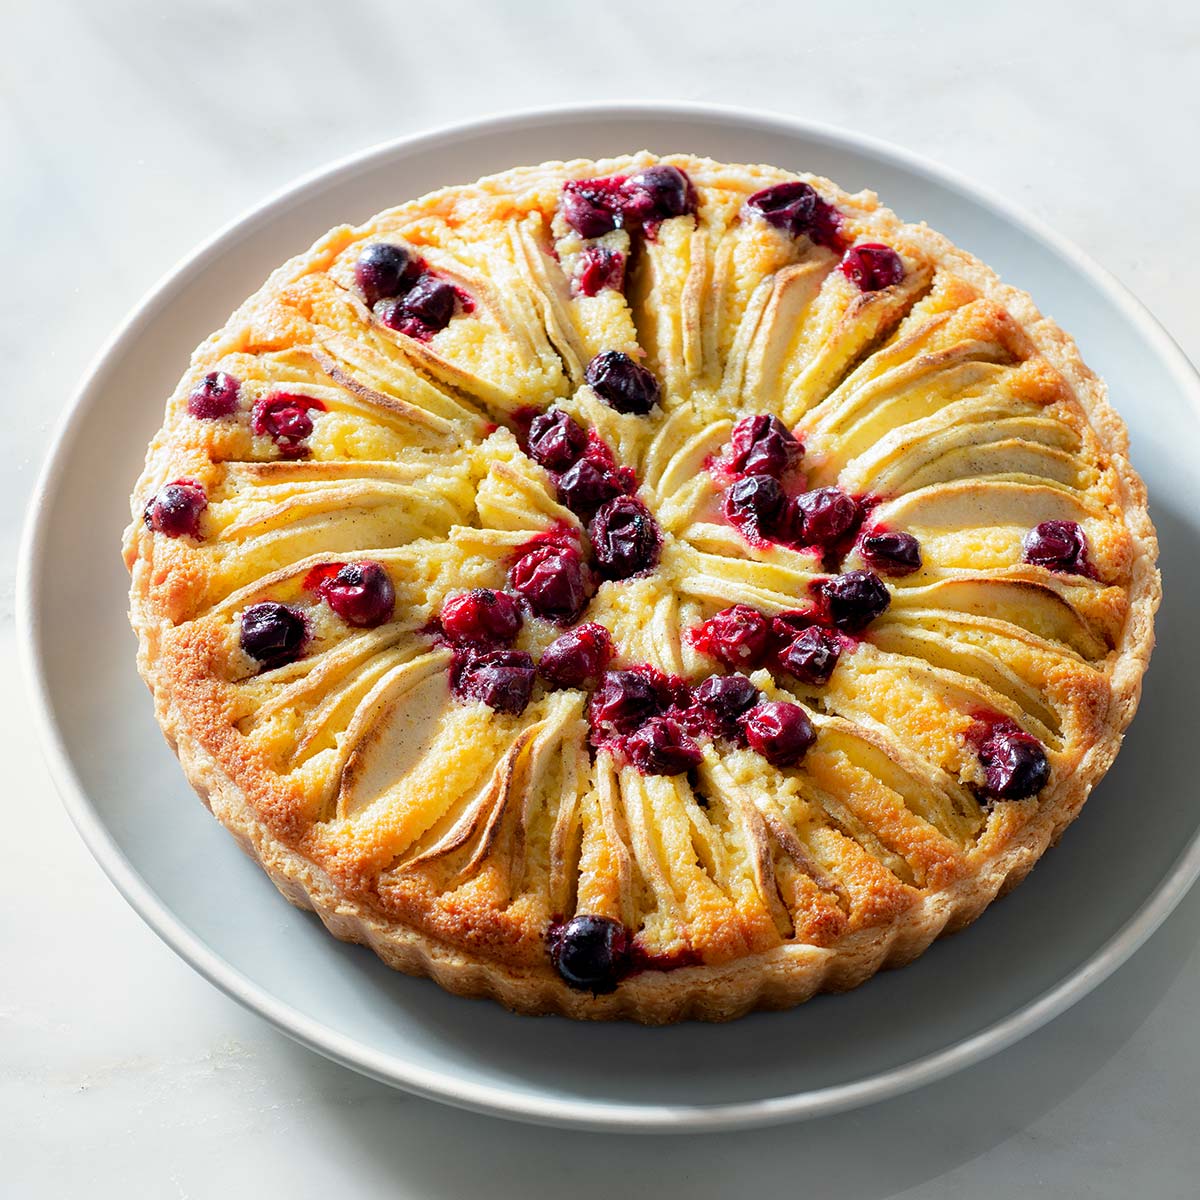 An apple frangipane tart with cranberries on a blue plate.